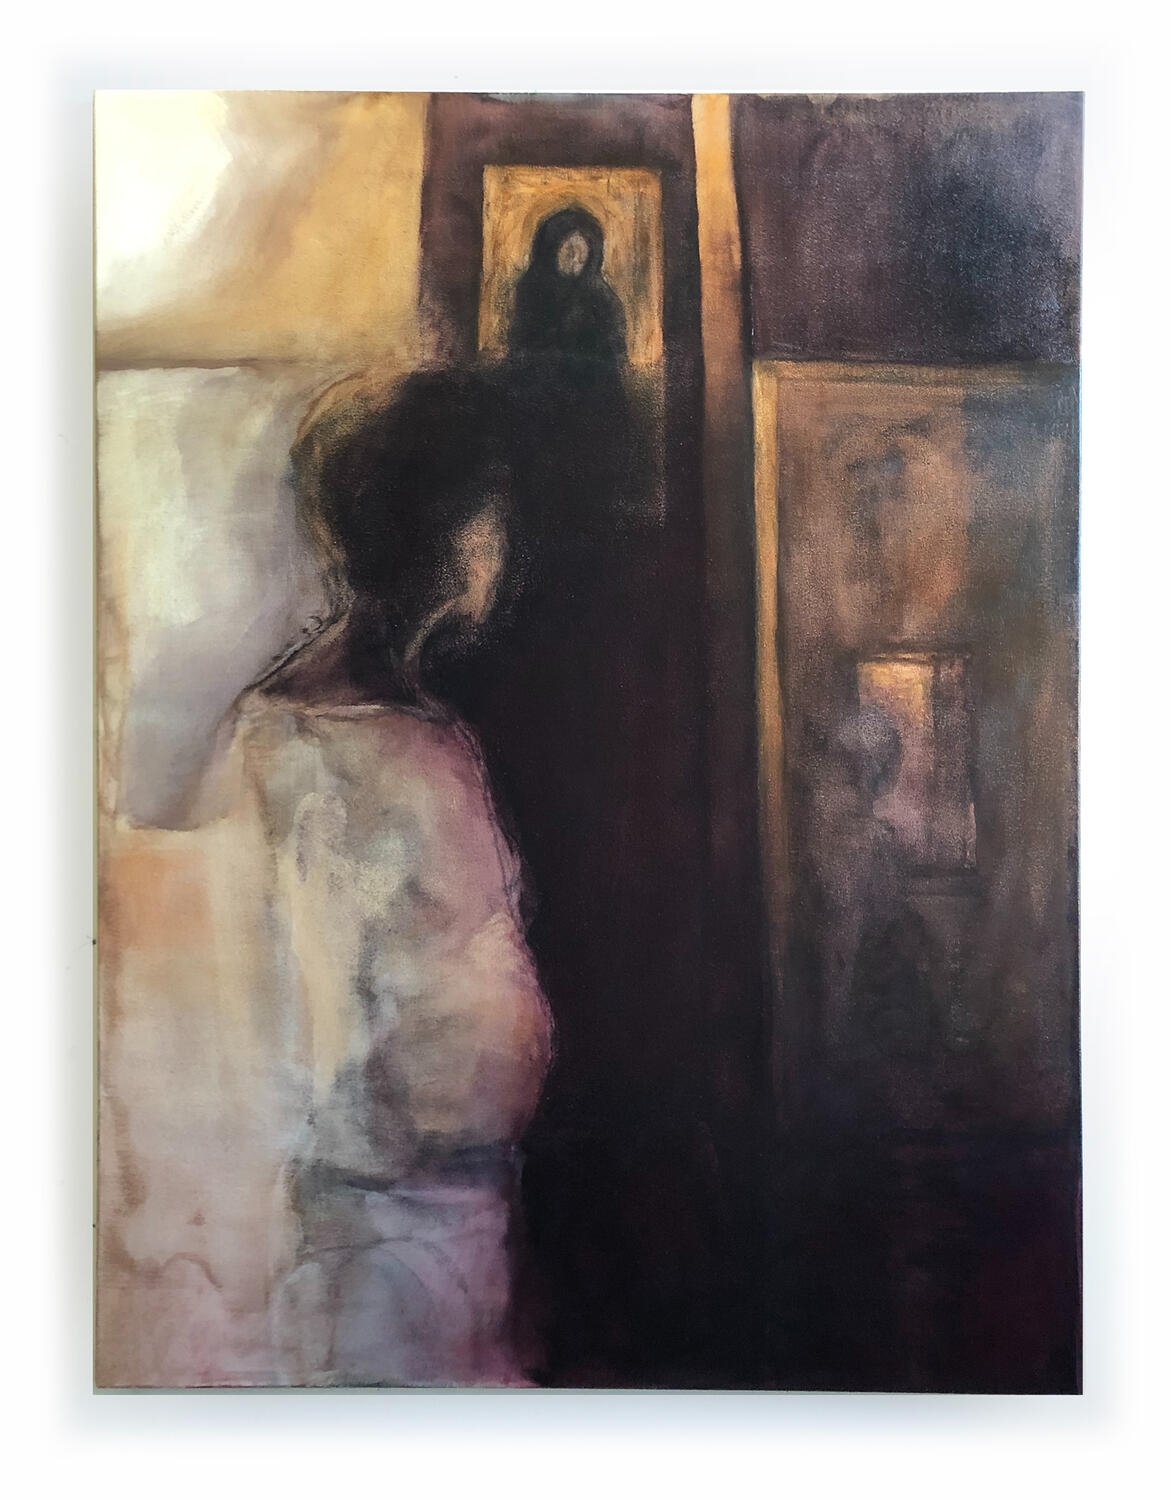 Mother. 2020. Oil paint on canvas. 48 x 36 inches.